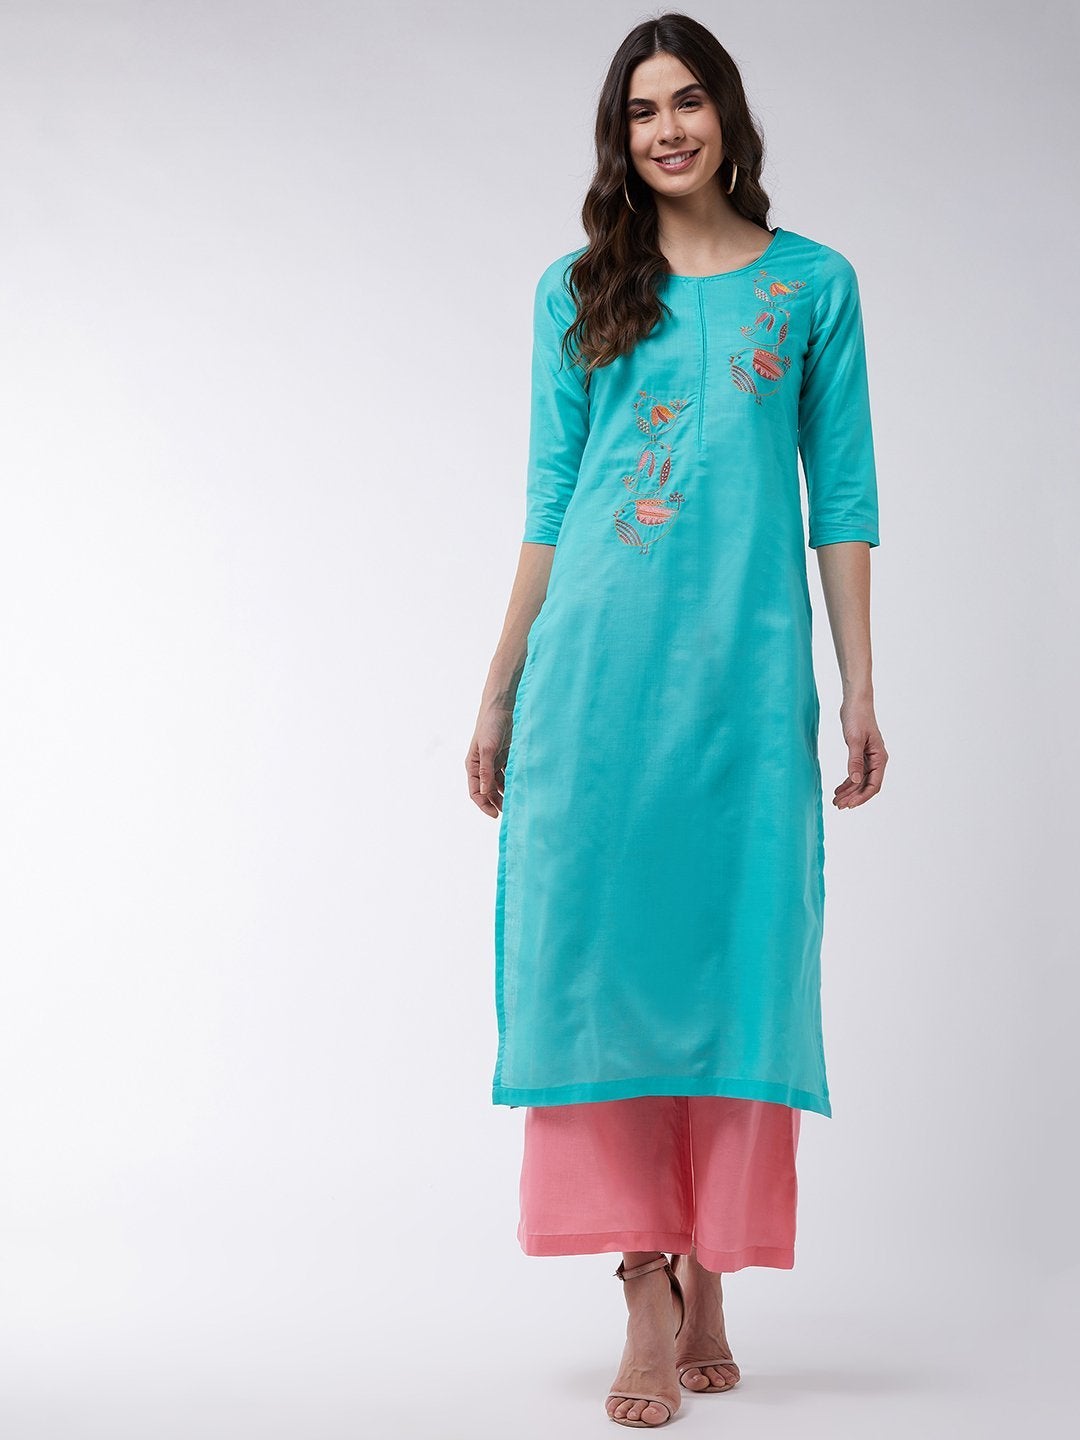 Women's Blue Embroidered Kurta With Contrasting Pants - Pannkh